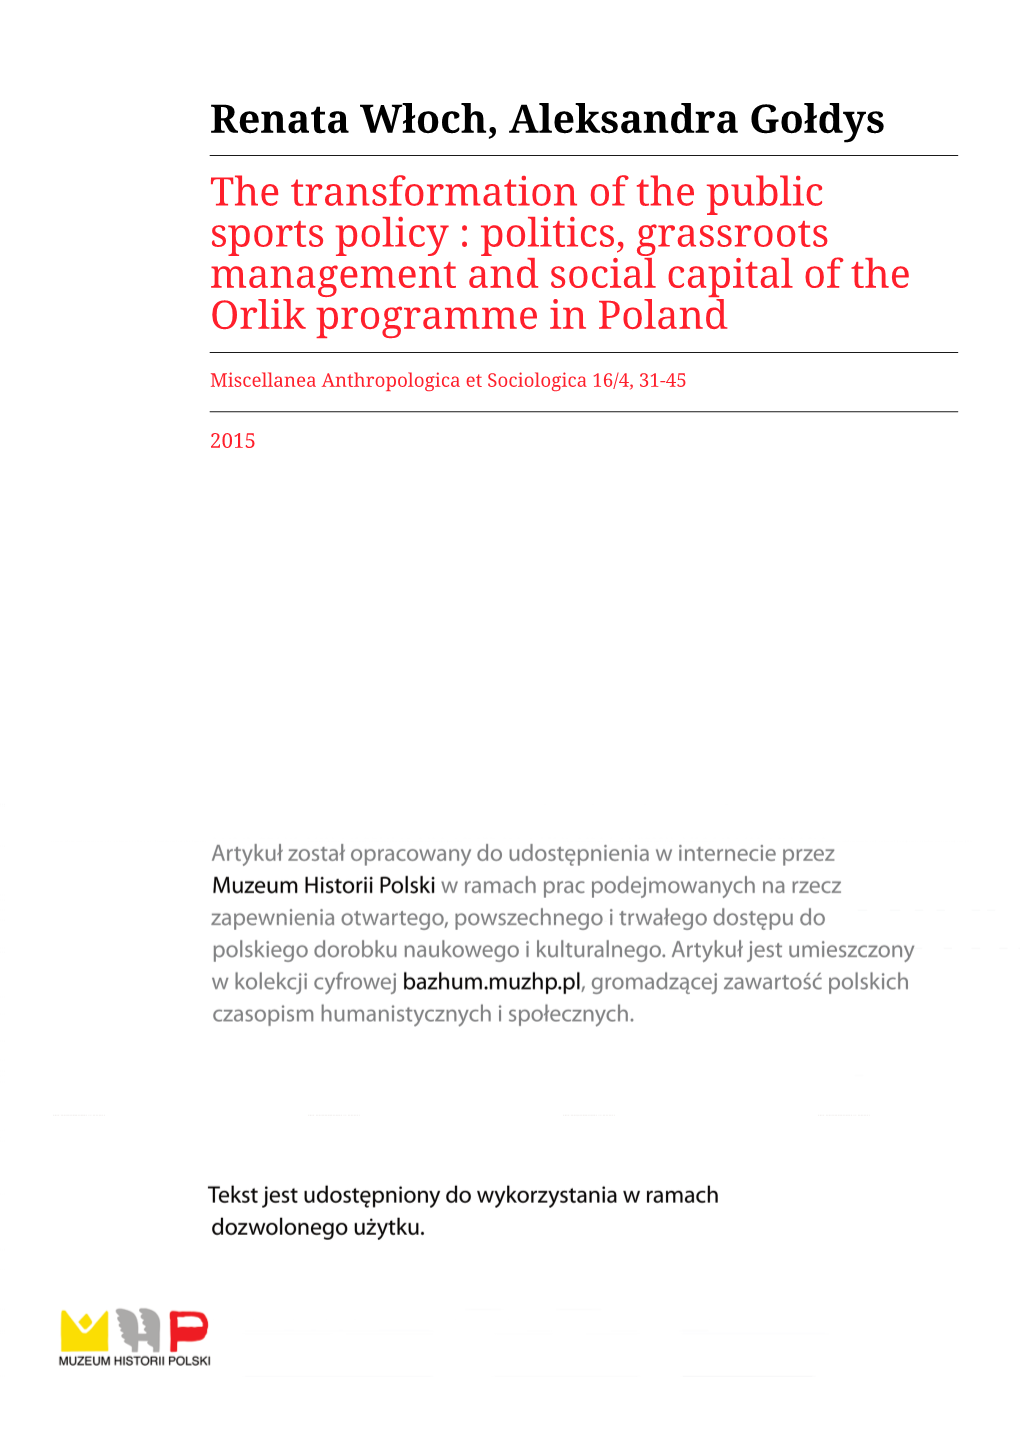 Renata Włoch, Aleksandra Gołdys the Transformation of the Public Sports Policy : Politics, Grassroots Management and Social Capital of the Orlik Programme in Poland